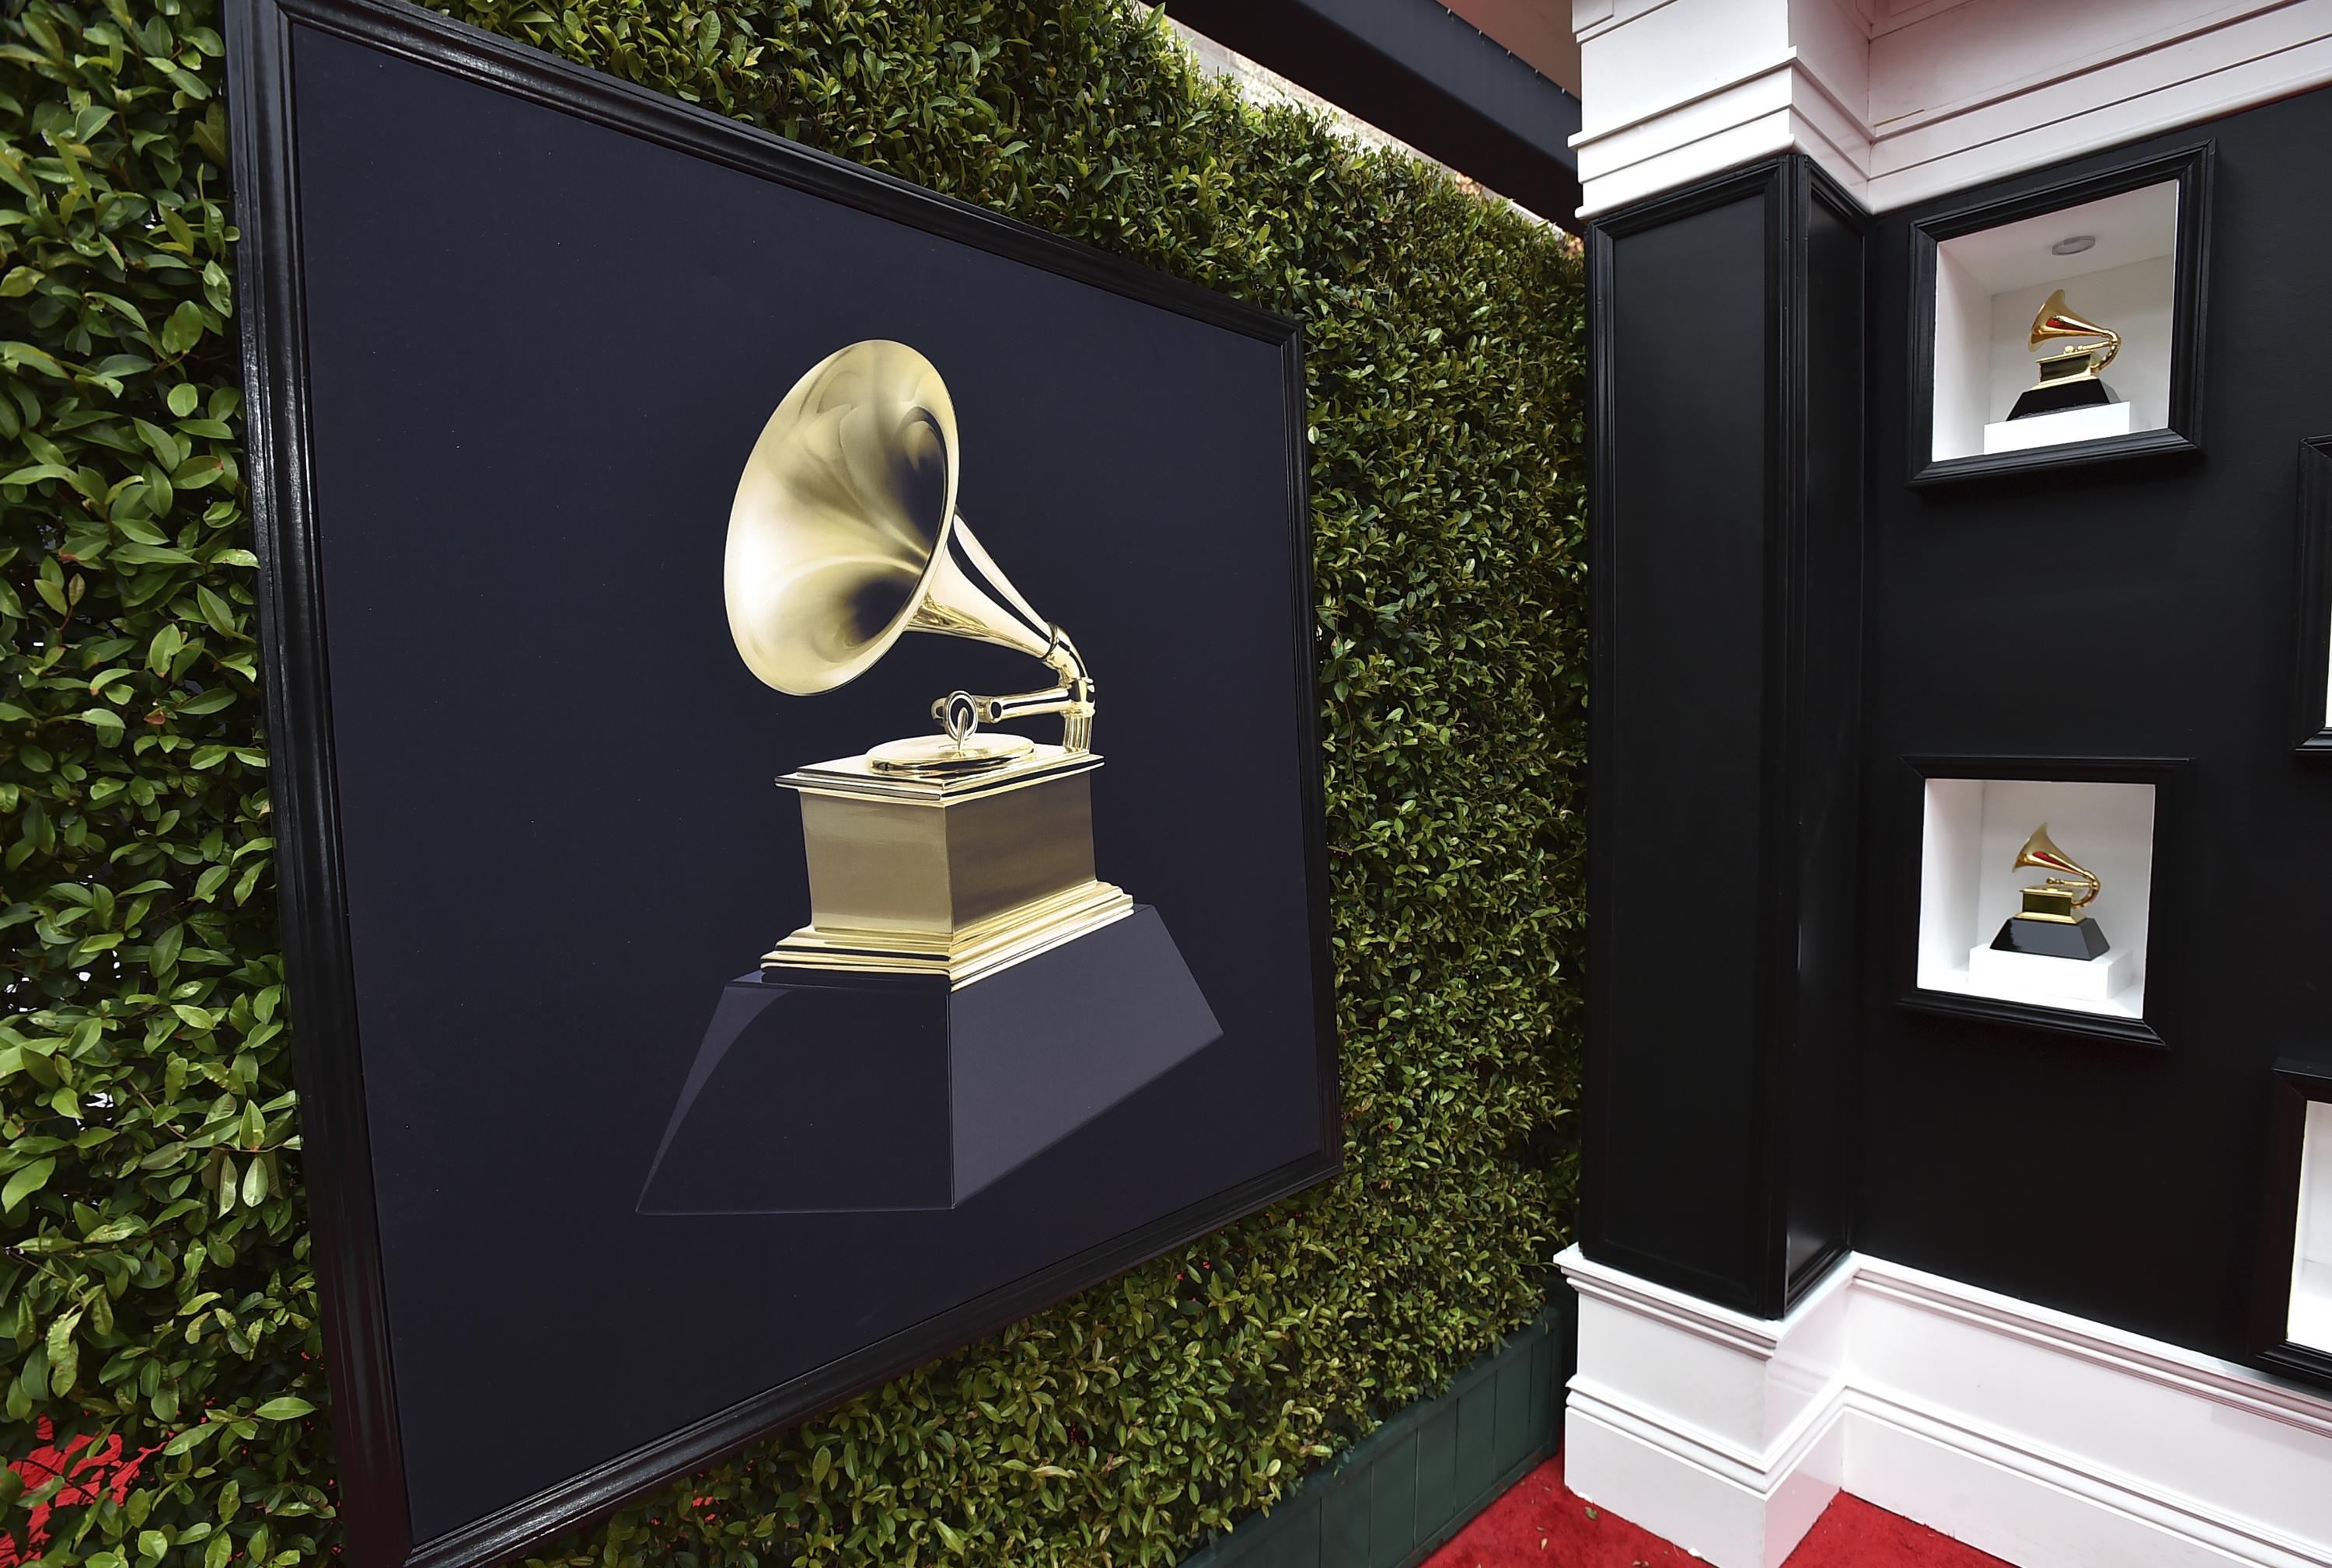 Grammy nominations to be announced, with 5 new categories